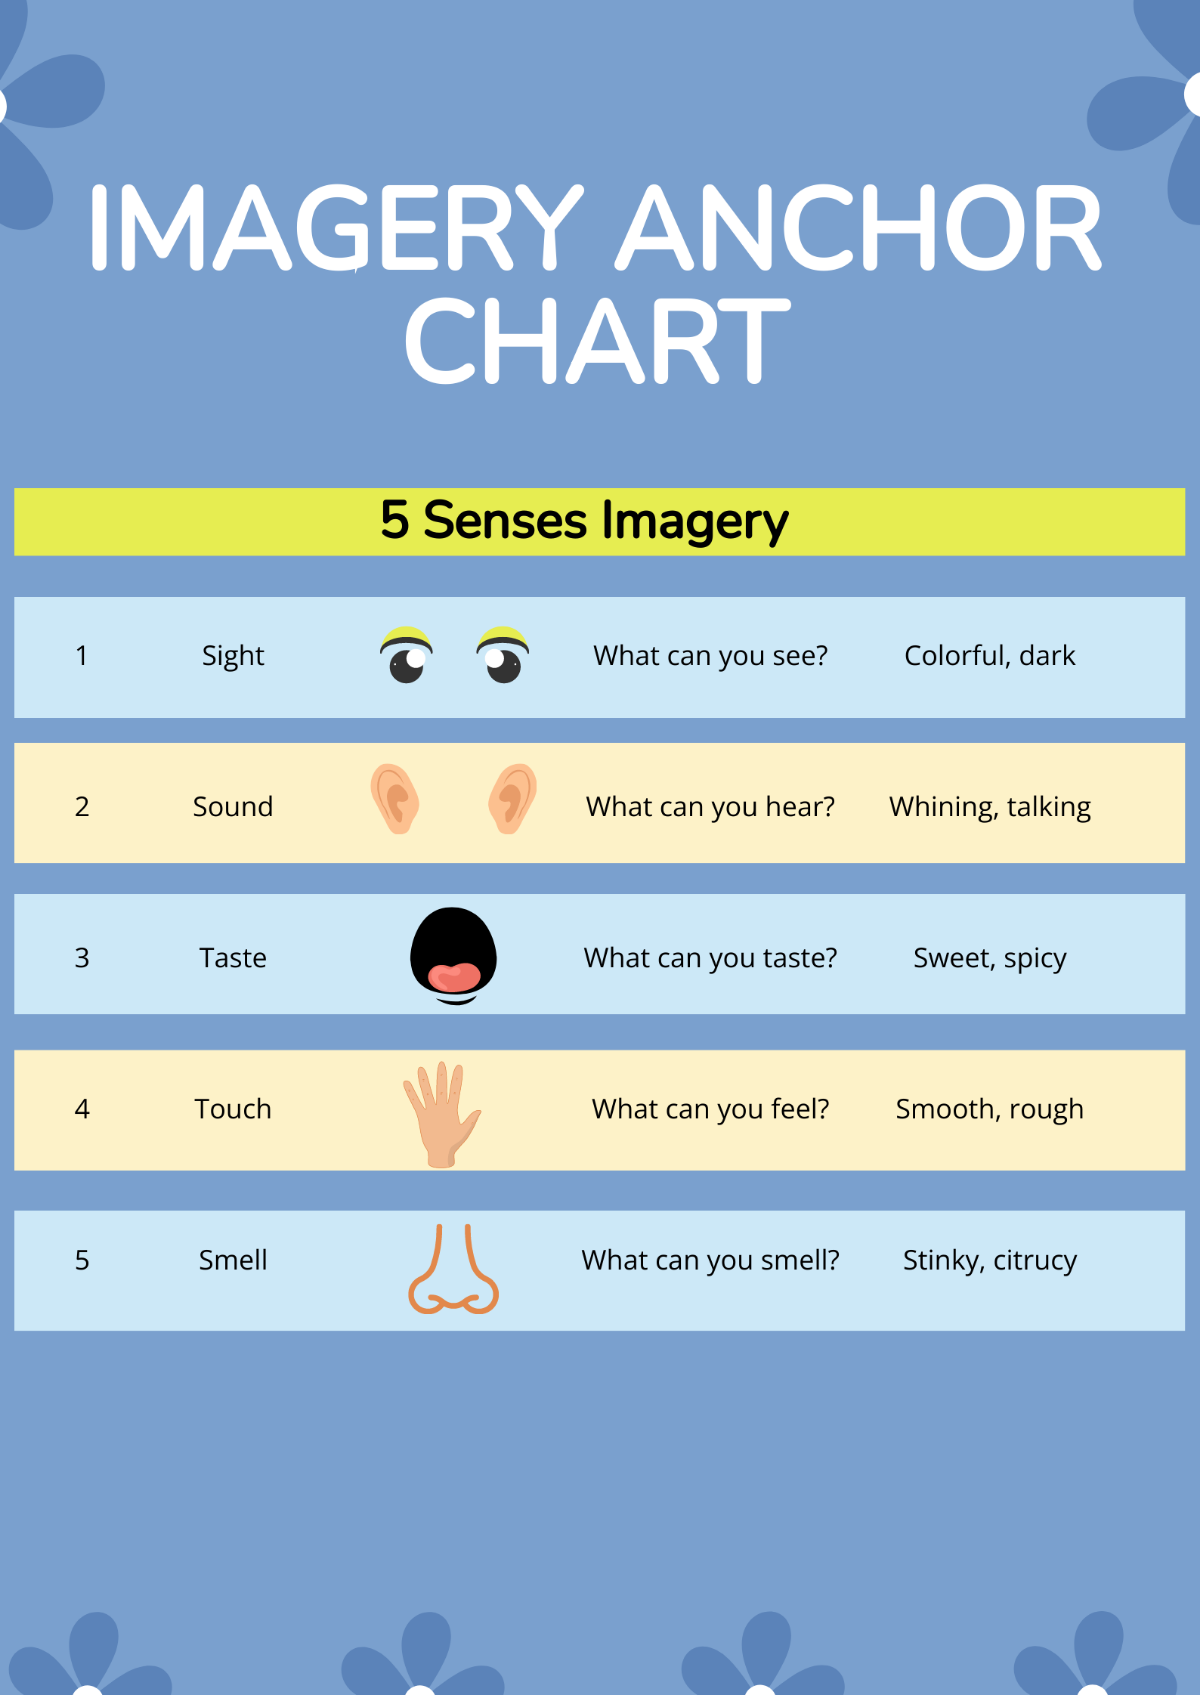 Free Imagery Anchor Chart Template